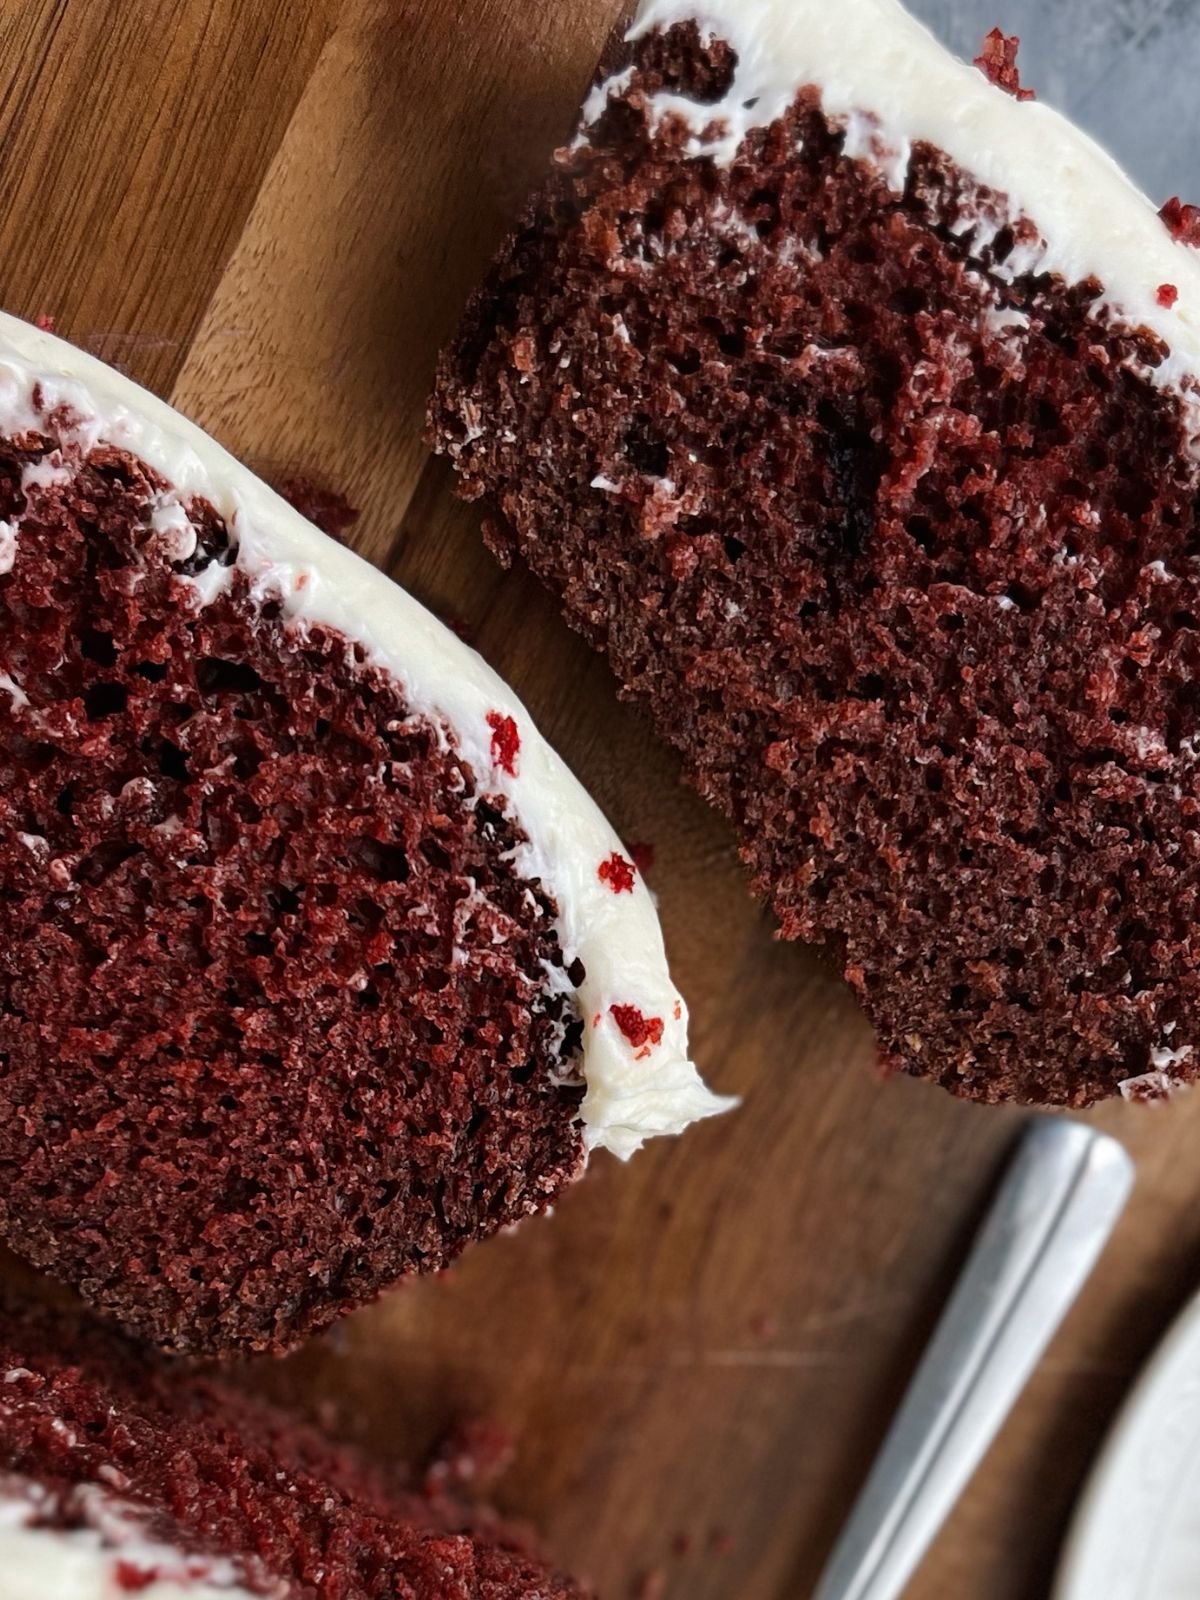 Two slices of red velvet cake on a wooden cutting board.